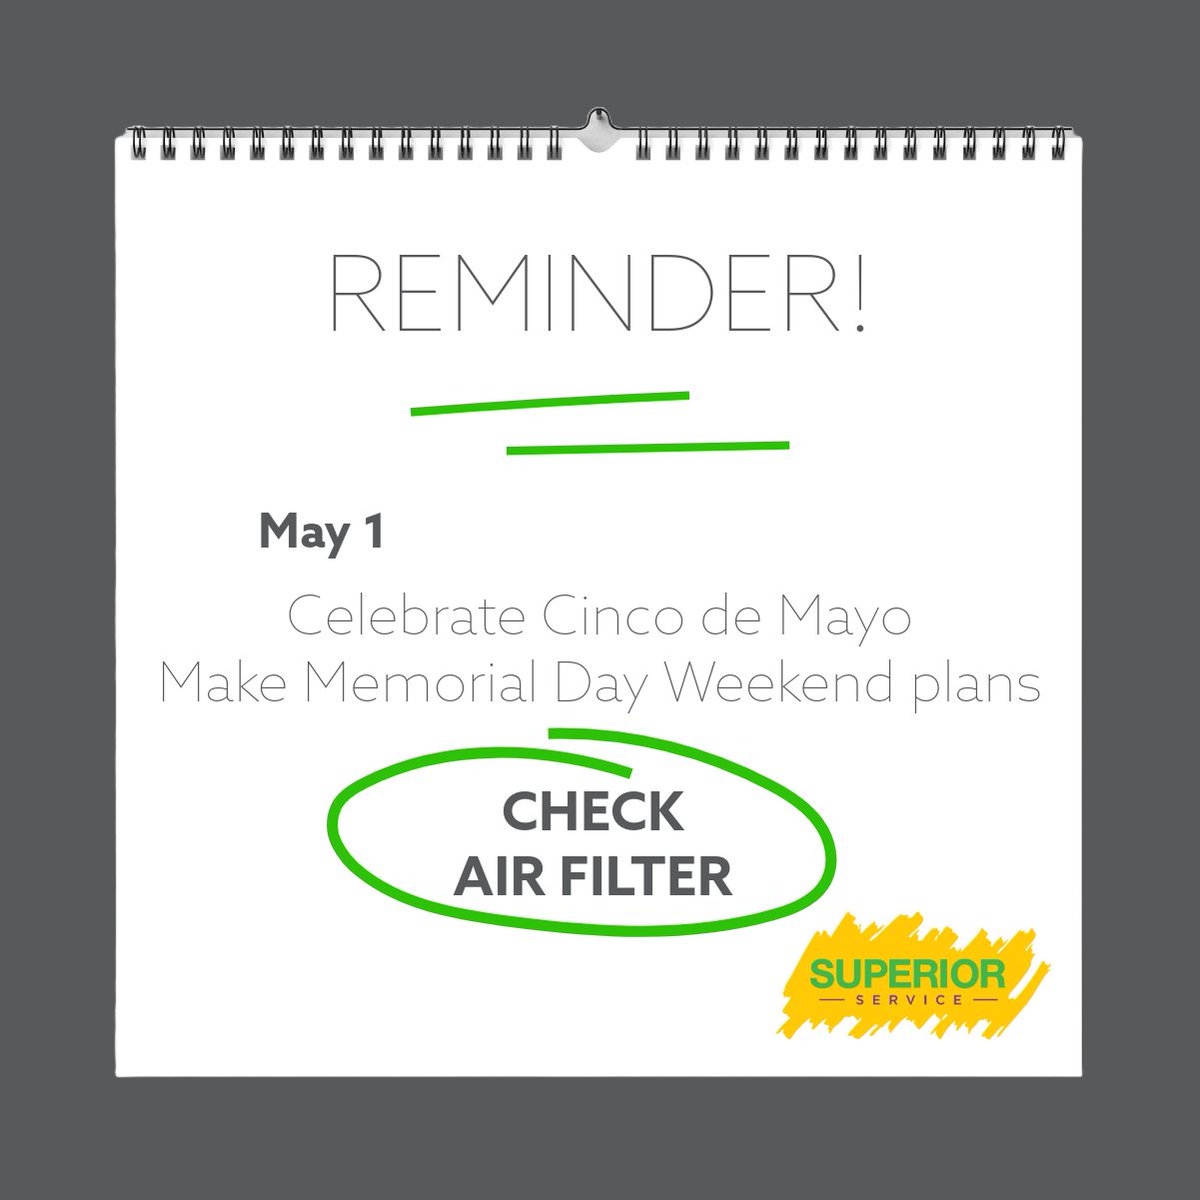 New month, new air filter! Keep your HVAC system in tip top shape 🍃

#HVACMaintenance #AirQuality